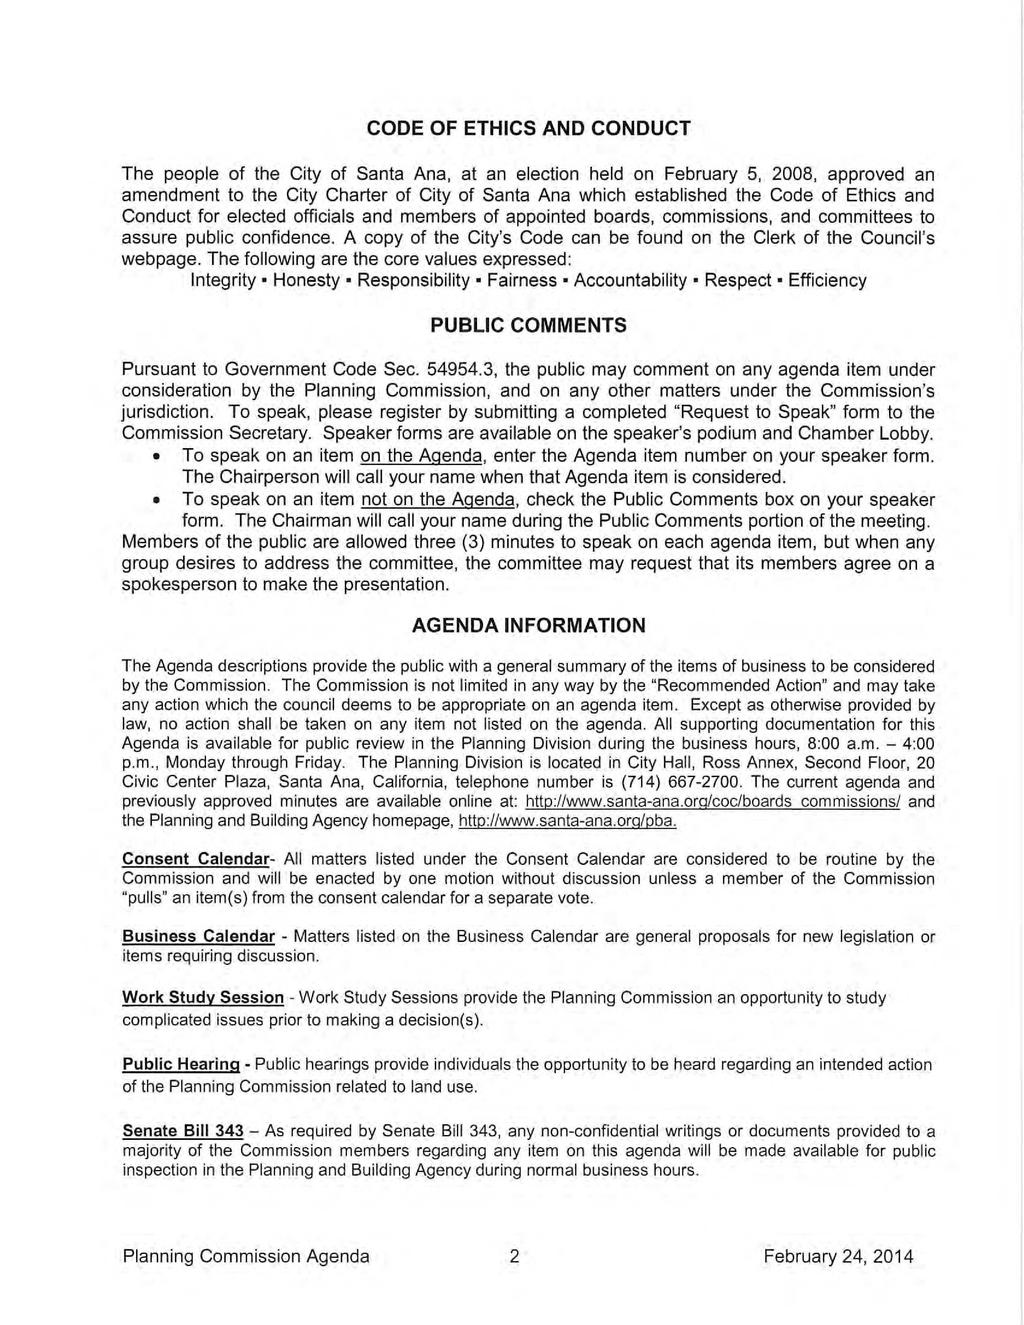 CODE OF ETHICS AND CONDUCT The people of the City of Santa Ana, at an election held on February 5, 2008, approved an amendment to the City Charter of City of Santa Ana which established the Code of